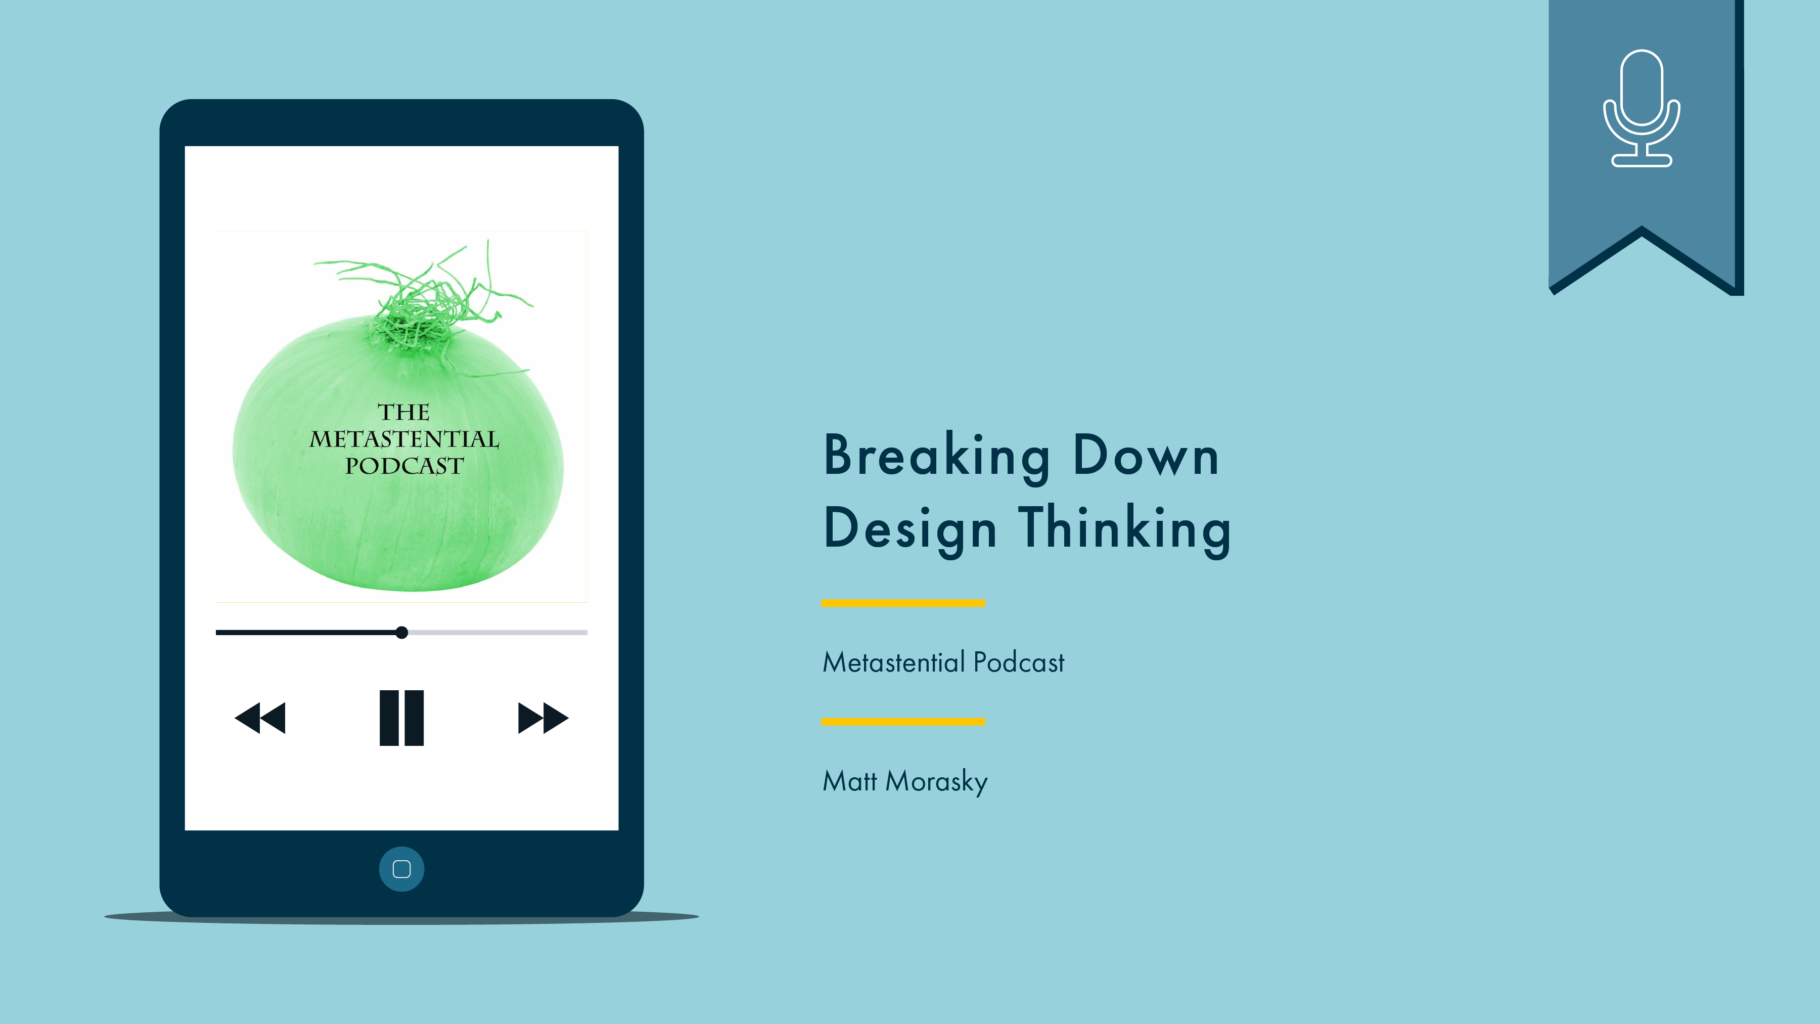 Phone with podcast artwork on the left. On the right reads “Breaking Down Design Thinking, Metastential Podcast, Matt Morasky.” Above is a blue flag with a white icon denoting that this is a podcast.